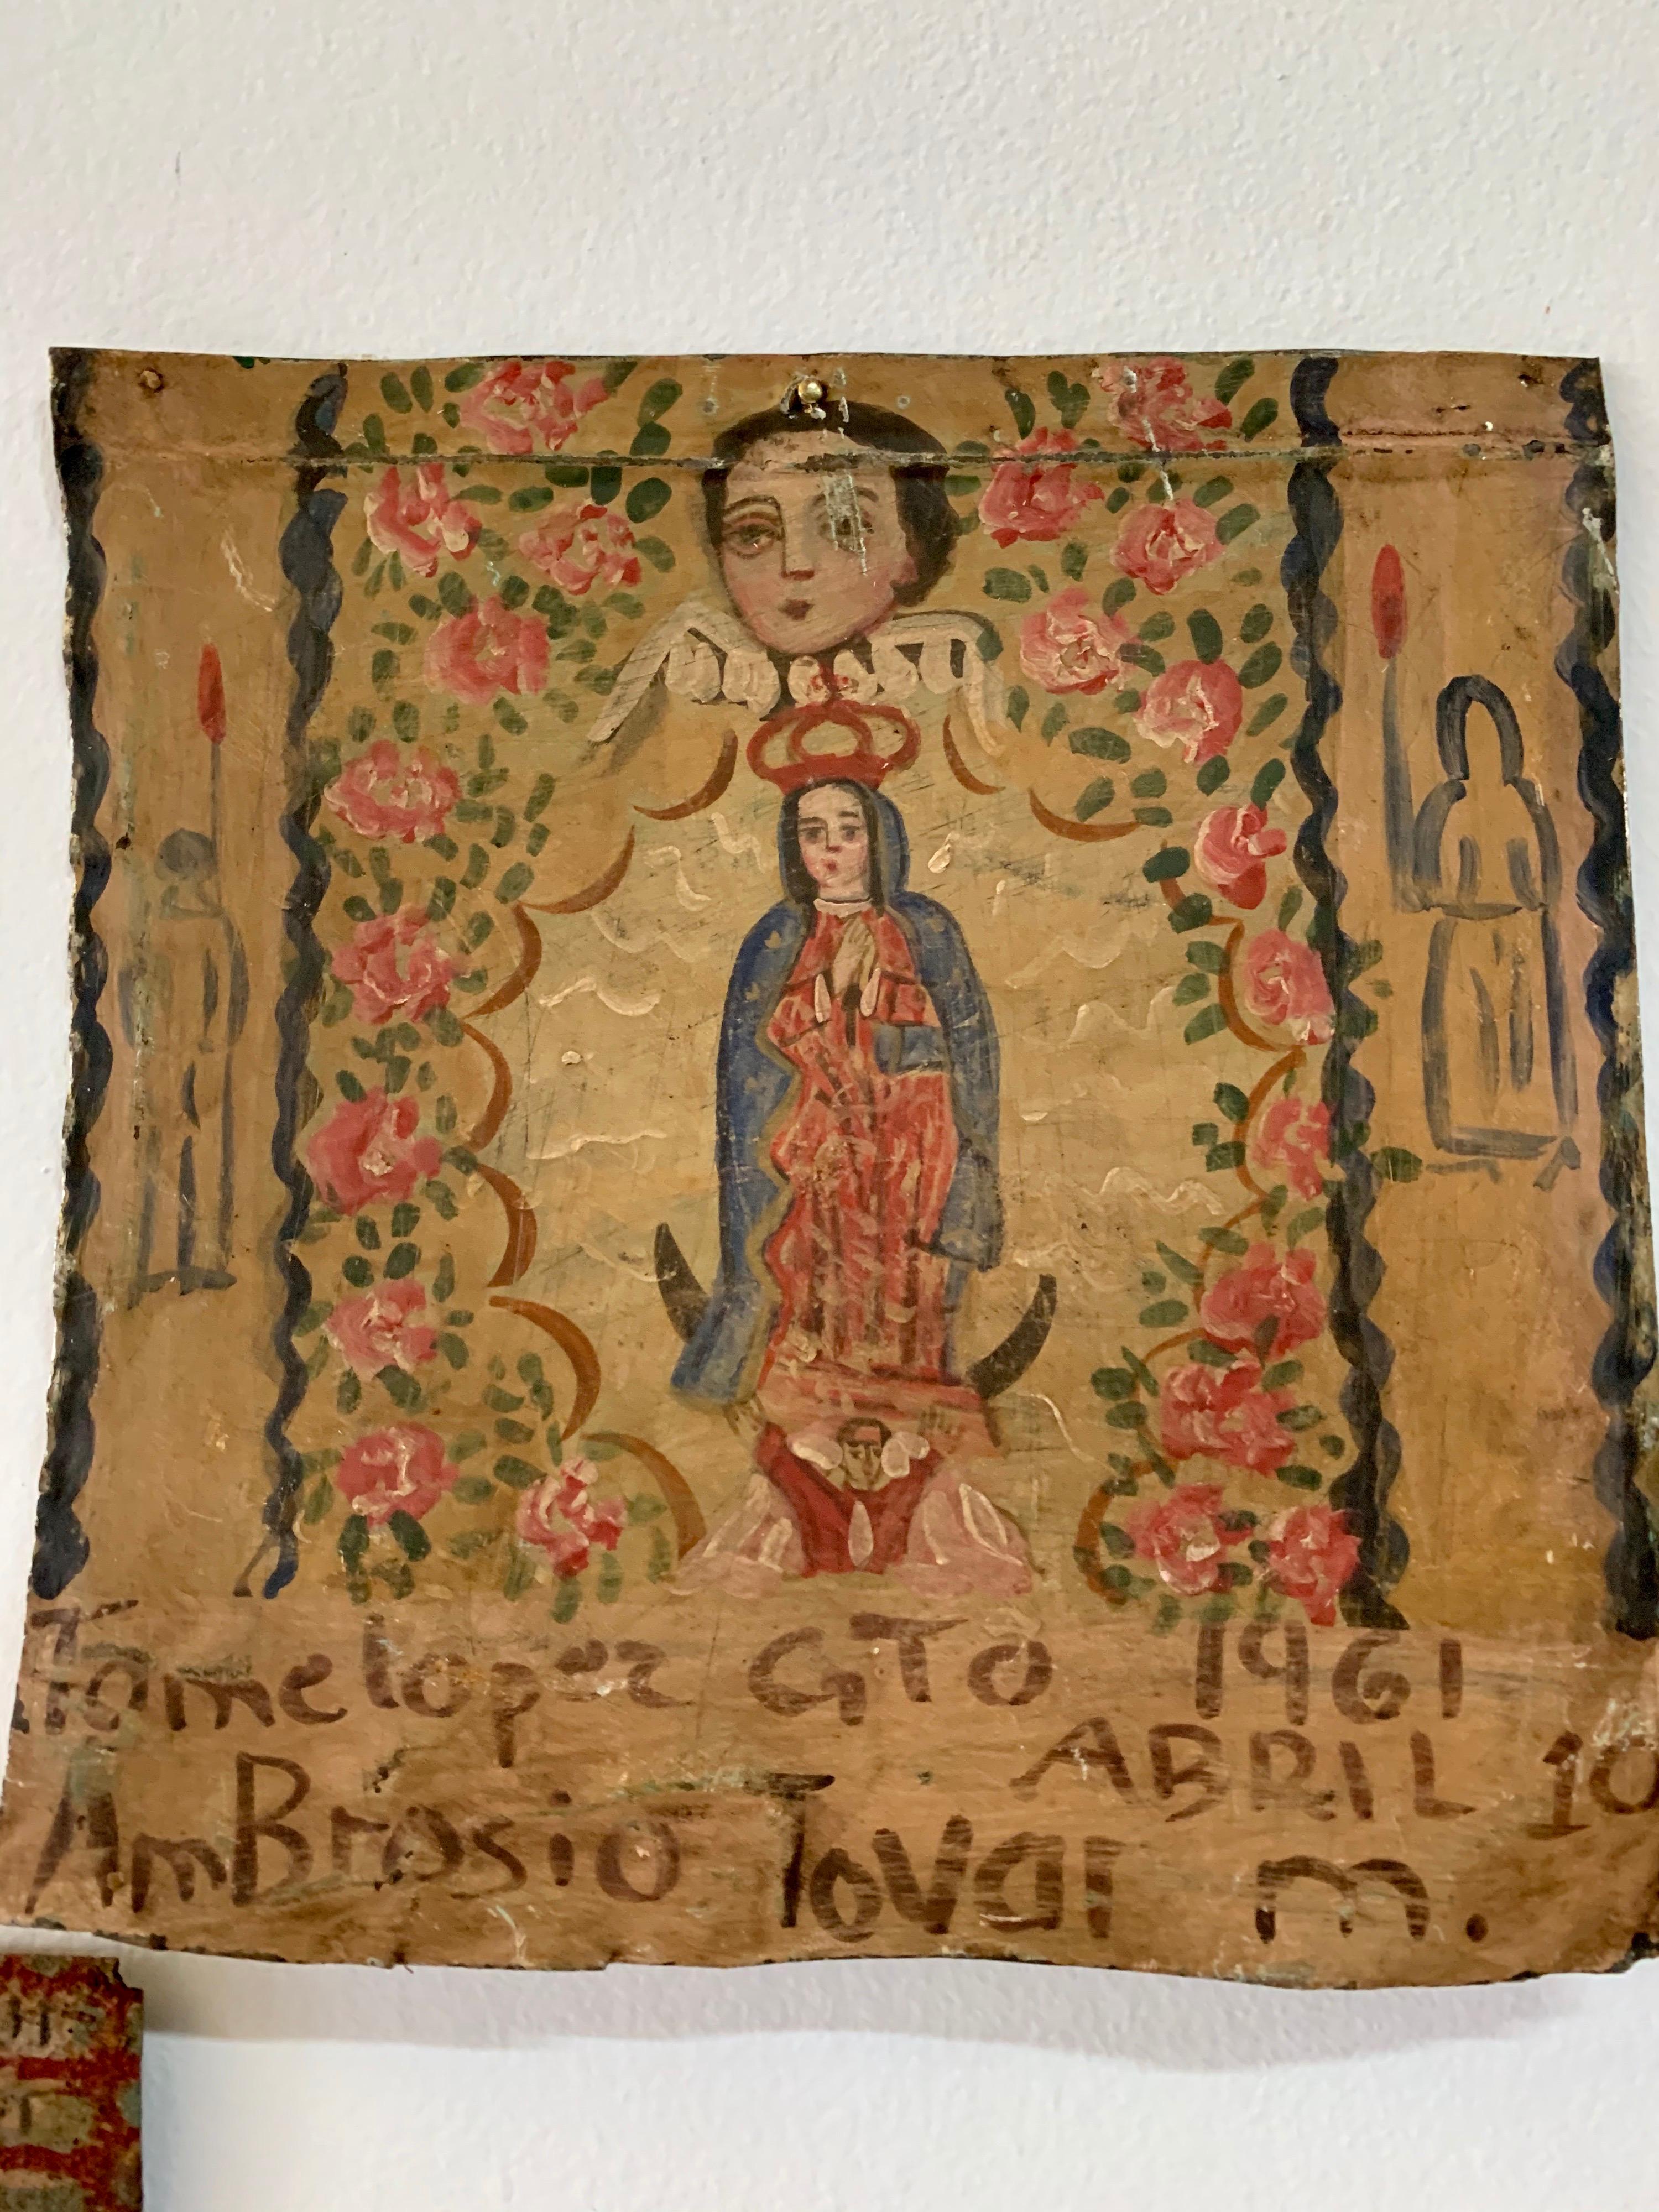 This is an amazing and important collection of 8 plaques (7 tin metal and one in wood) that have been hand painted by Catholic religious devotees in gratitude to either Christ, Virgin Mary or a specific Saint. These are Mexican and painted in 1950s